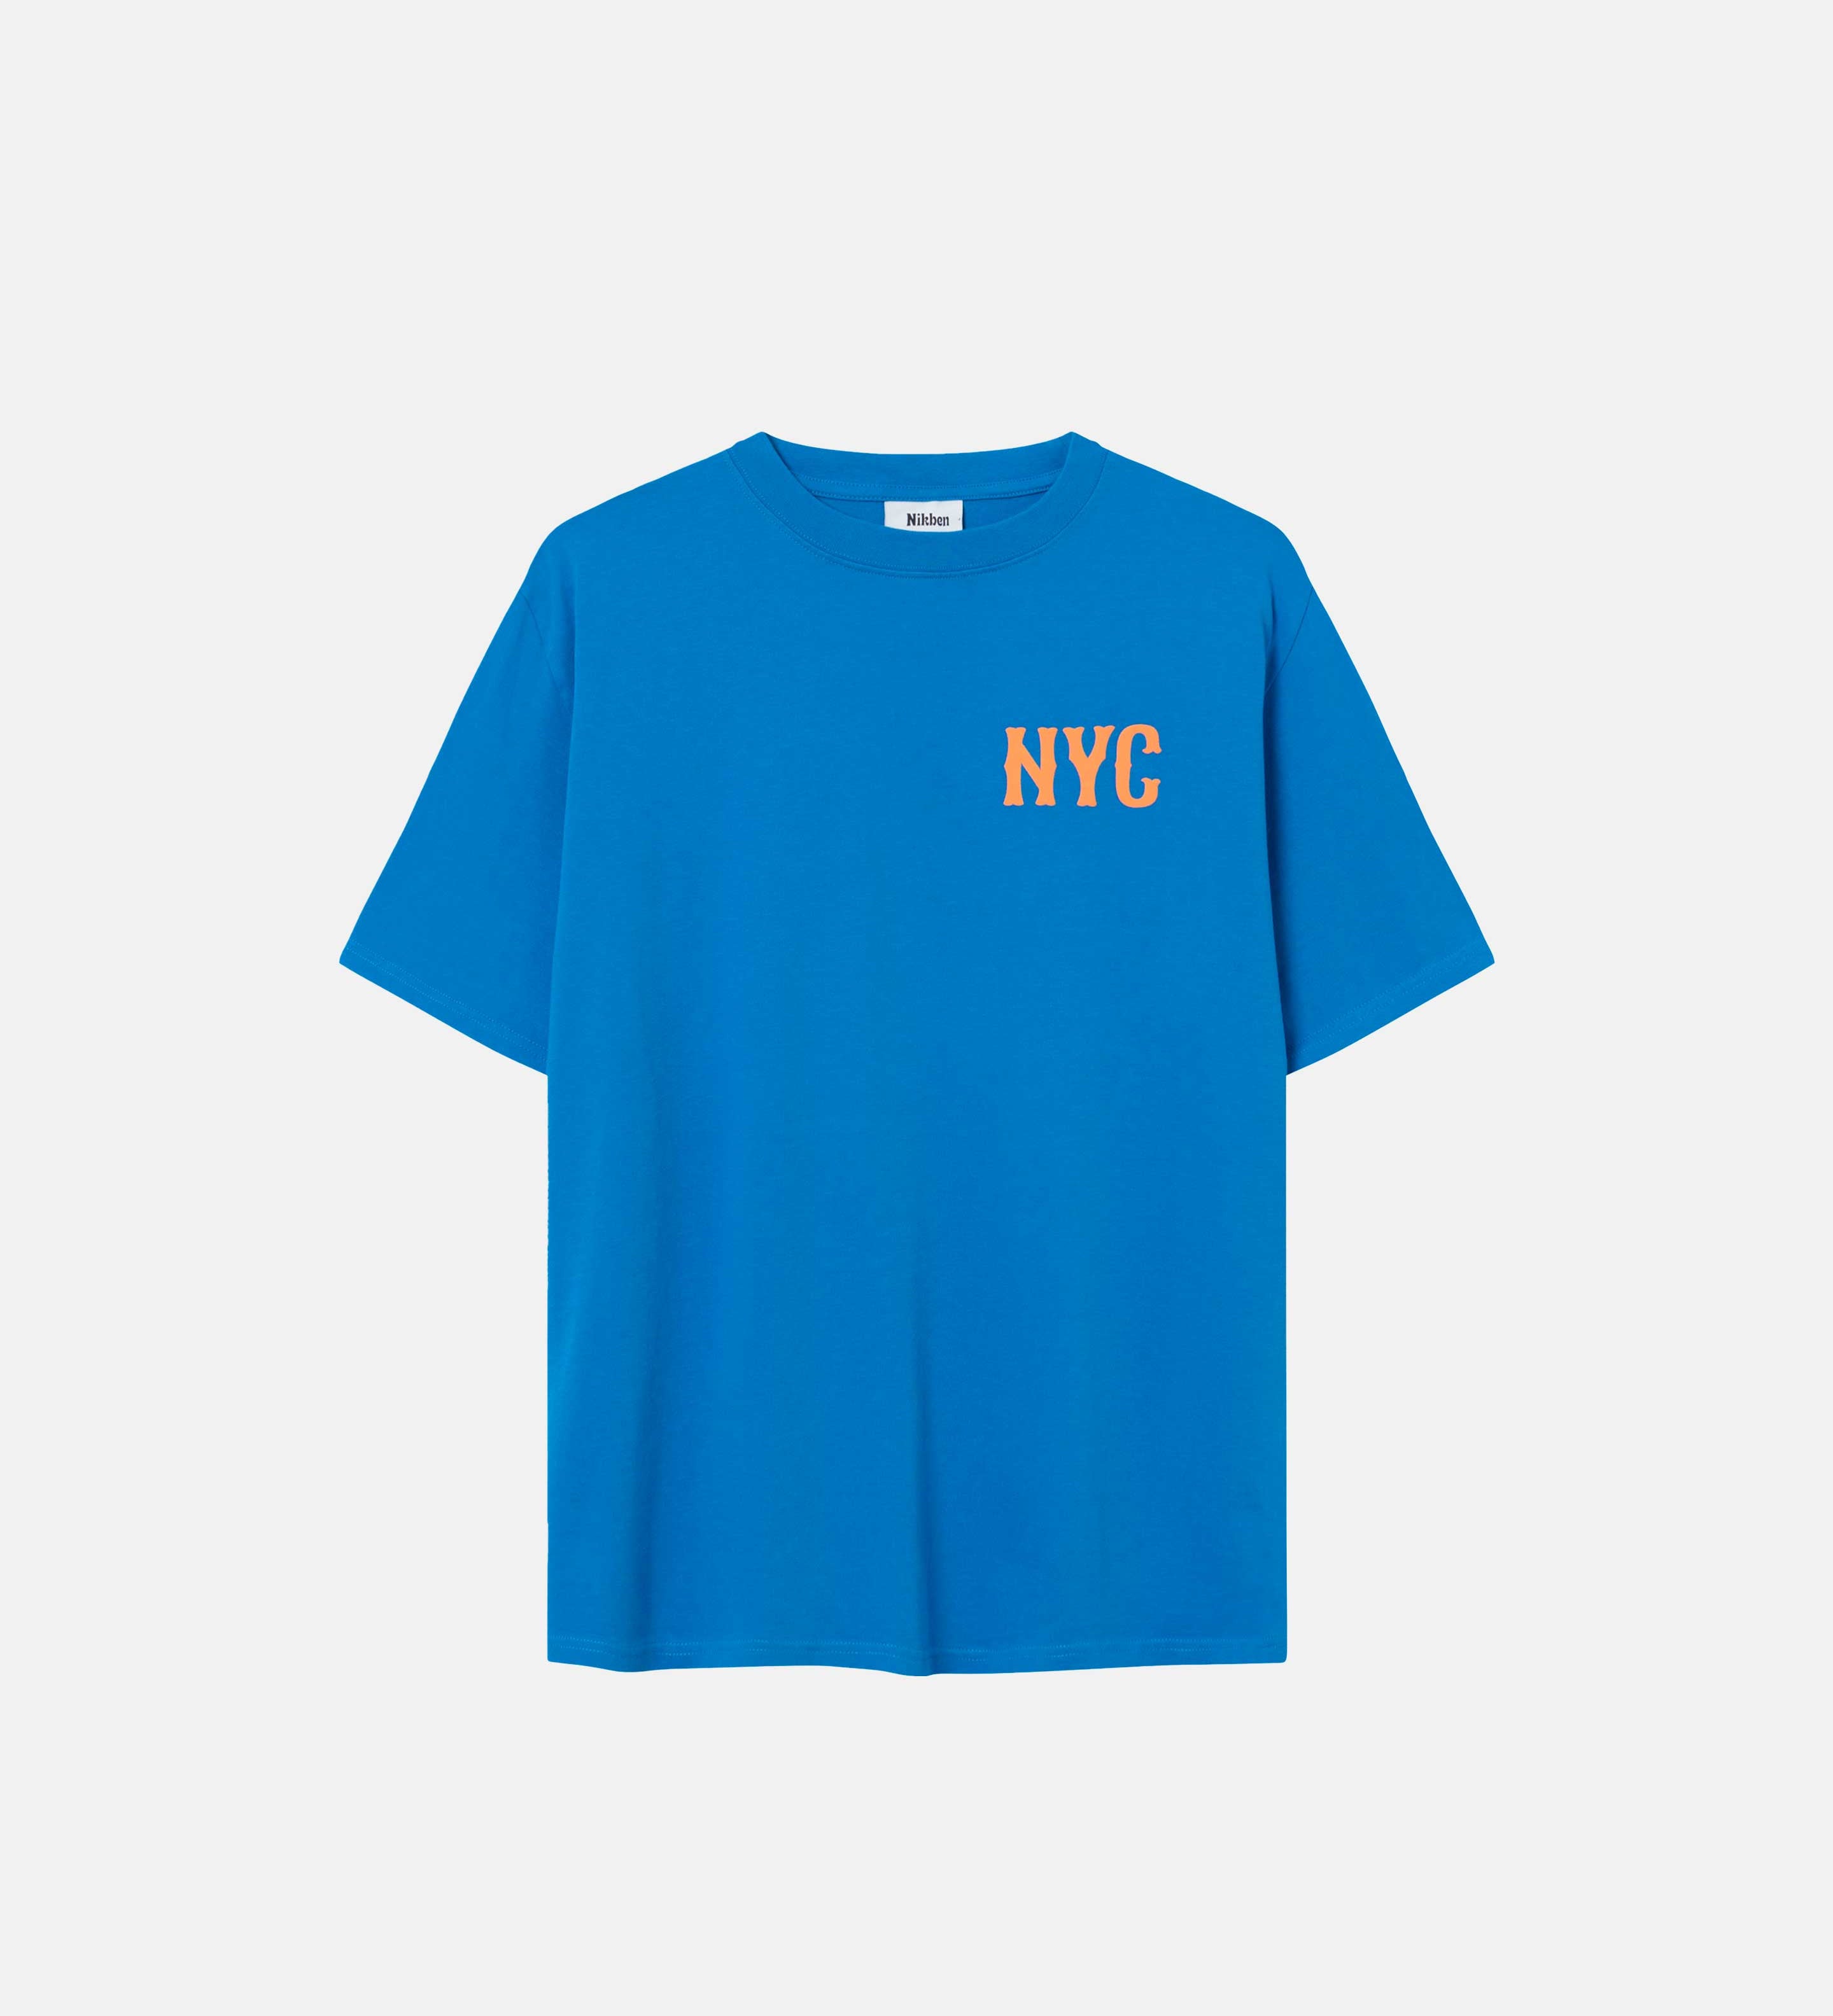 Blue t-shirt with "NYC" chest print in orange letters.